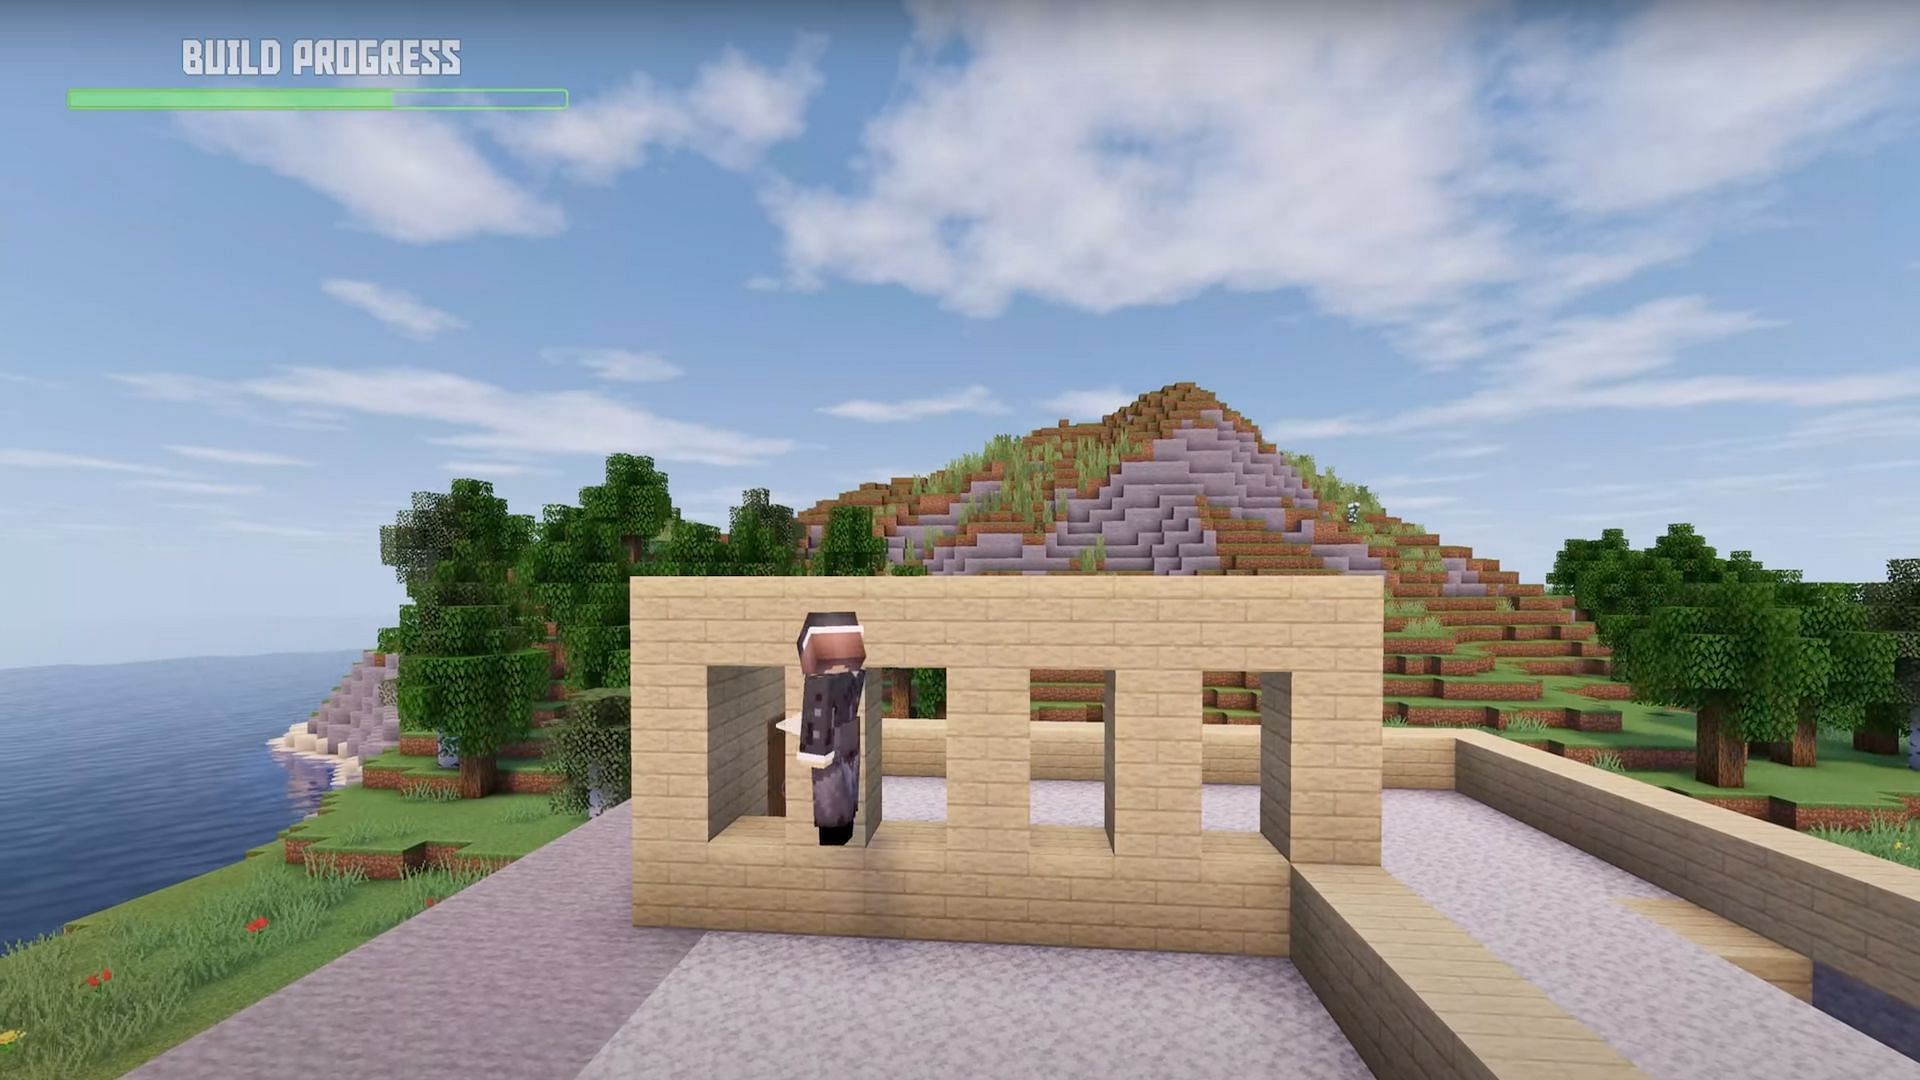 Players can then start working on the second floor, adding floors and walls as needed (Image via Greg Builds/YouTube)